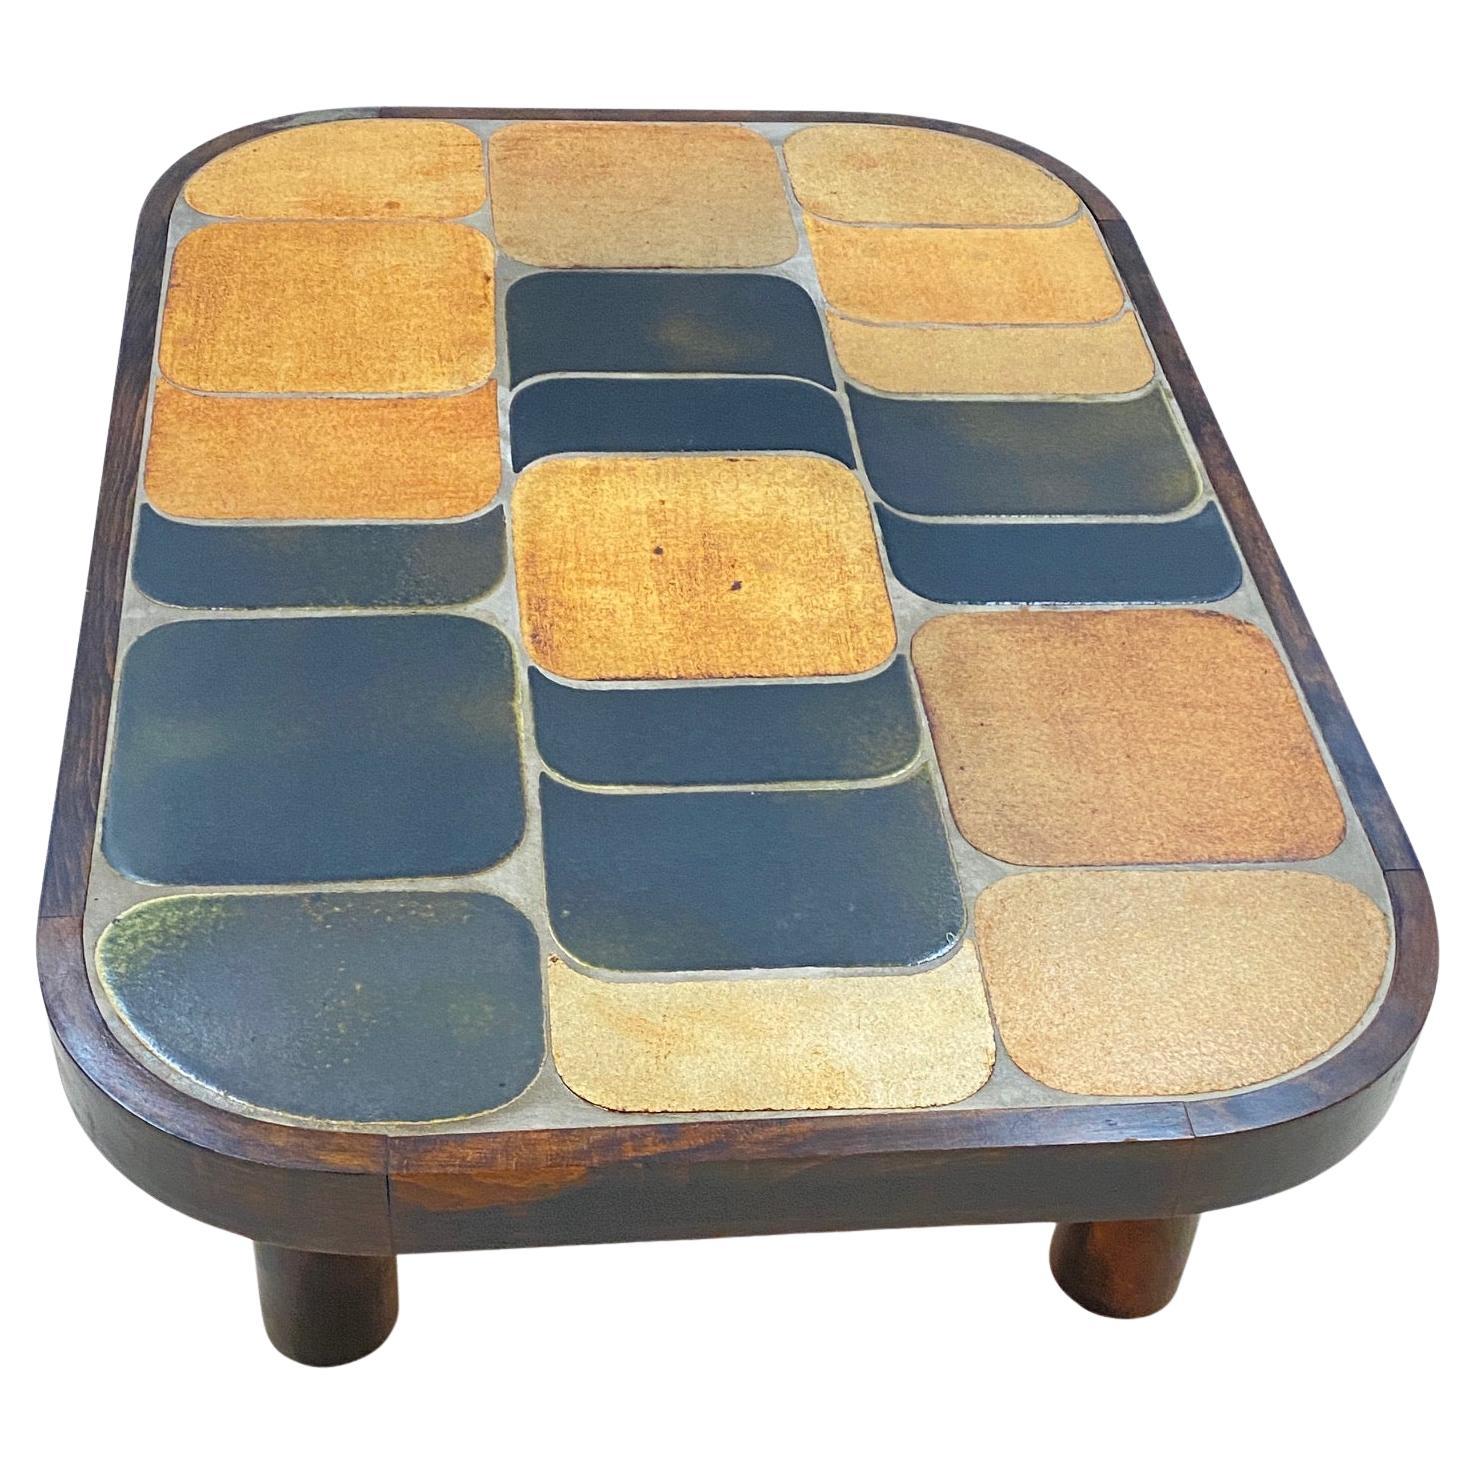 Roger Capron ‘Shogun’ Coffee Table in Ceramic France 1970 Brown and Grey Color